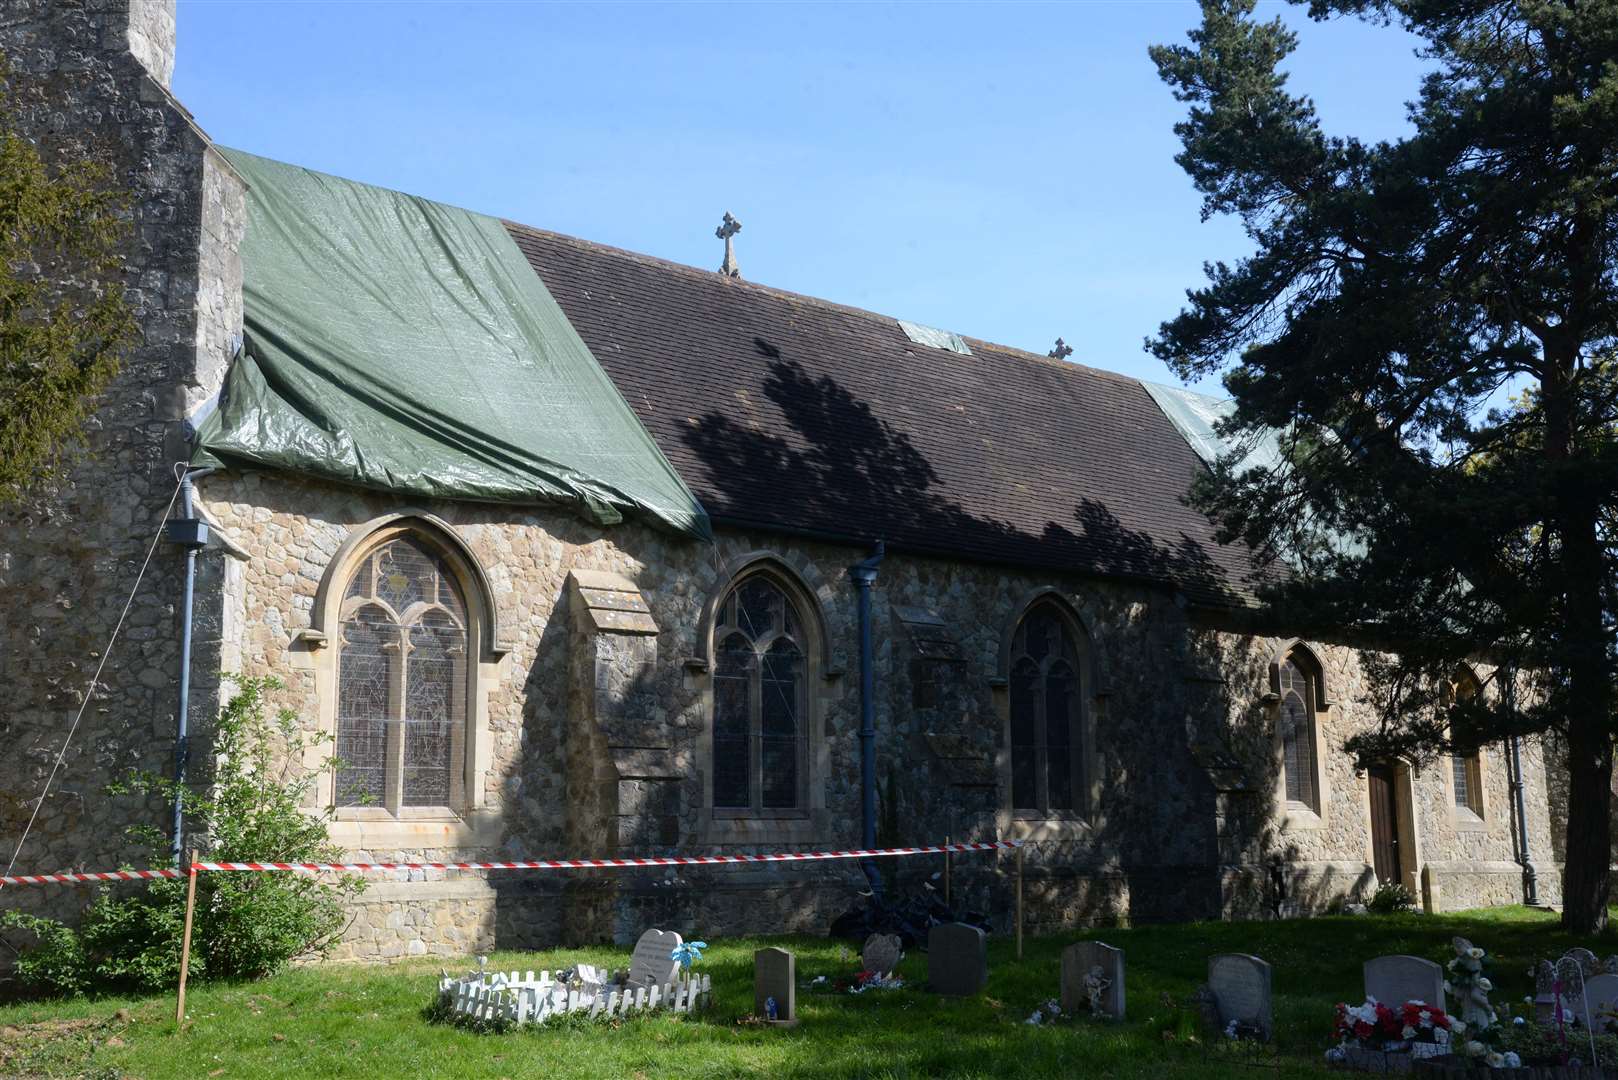 All Saints Church, Whitstable suffered damage to its roof